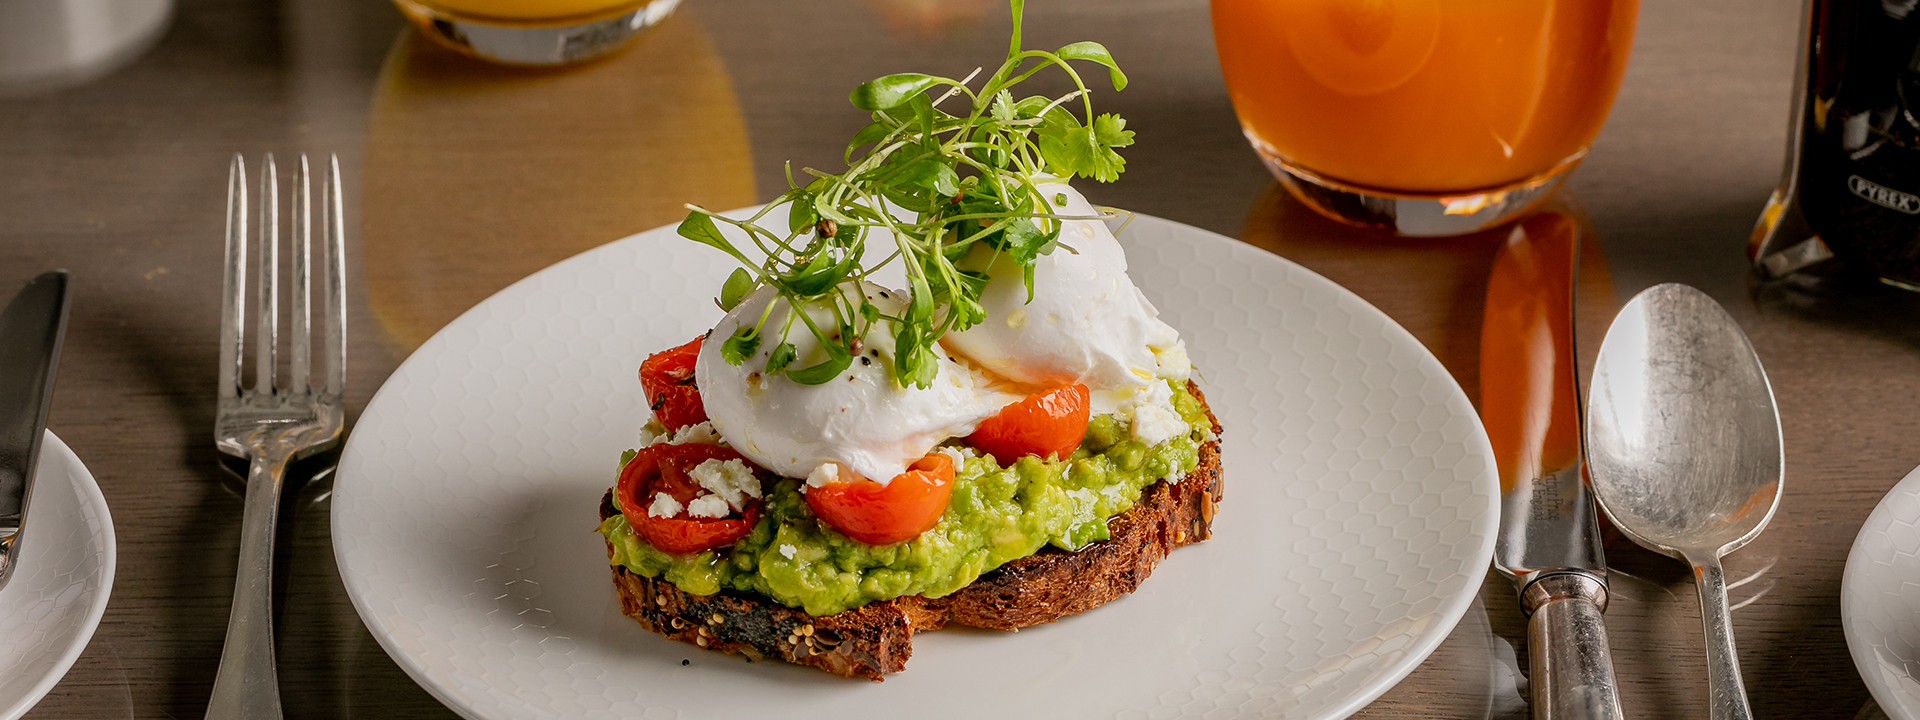 Crushed avocado toast, a favourite at The Berkeley, which can be ordered for breakfast in the Collins Room.